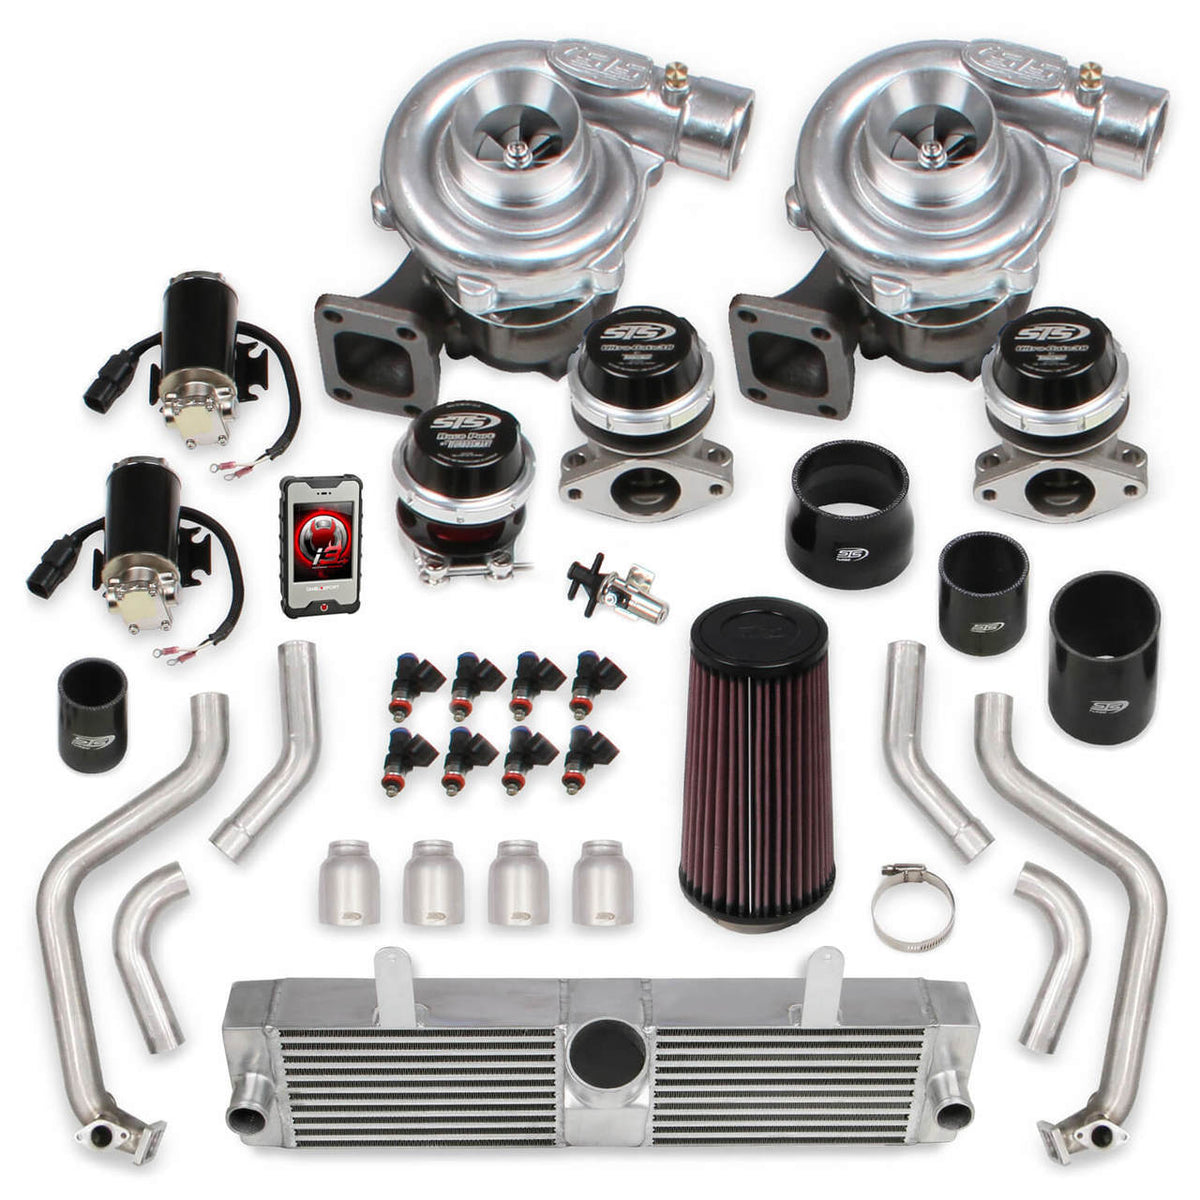 2001-2004 CORVETTE LS1 / Z06 LS6 STS TURBO REAR MOUNTED TWIN TURBO SYSTEM WITH TUNER & FUEL INJECTORS, HOLLEY